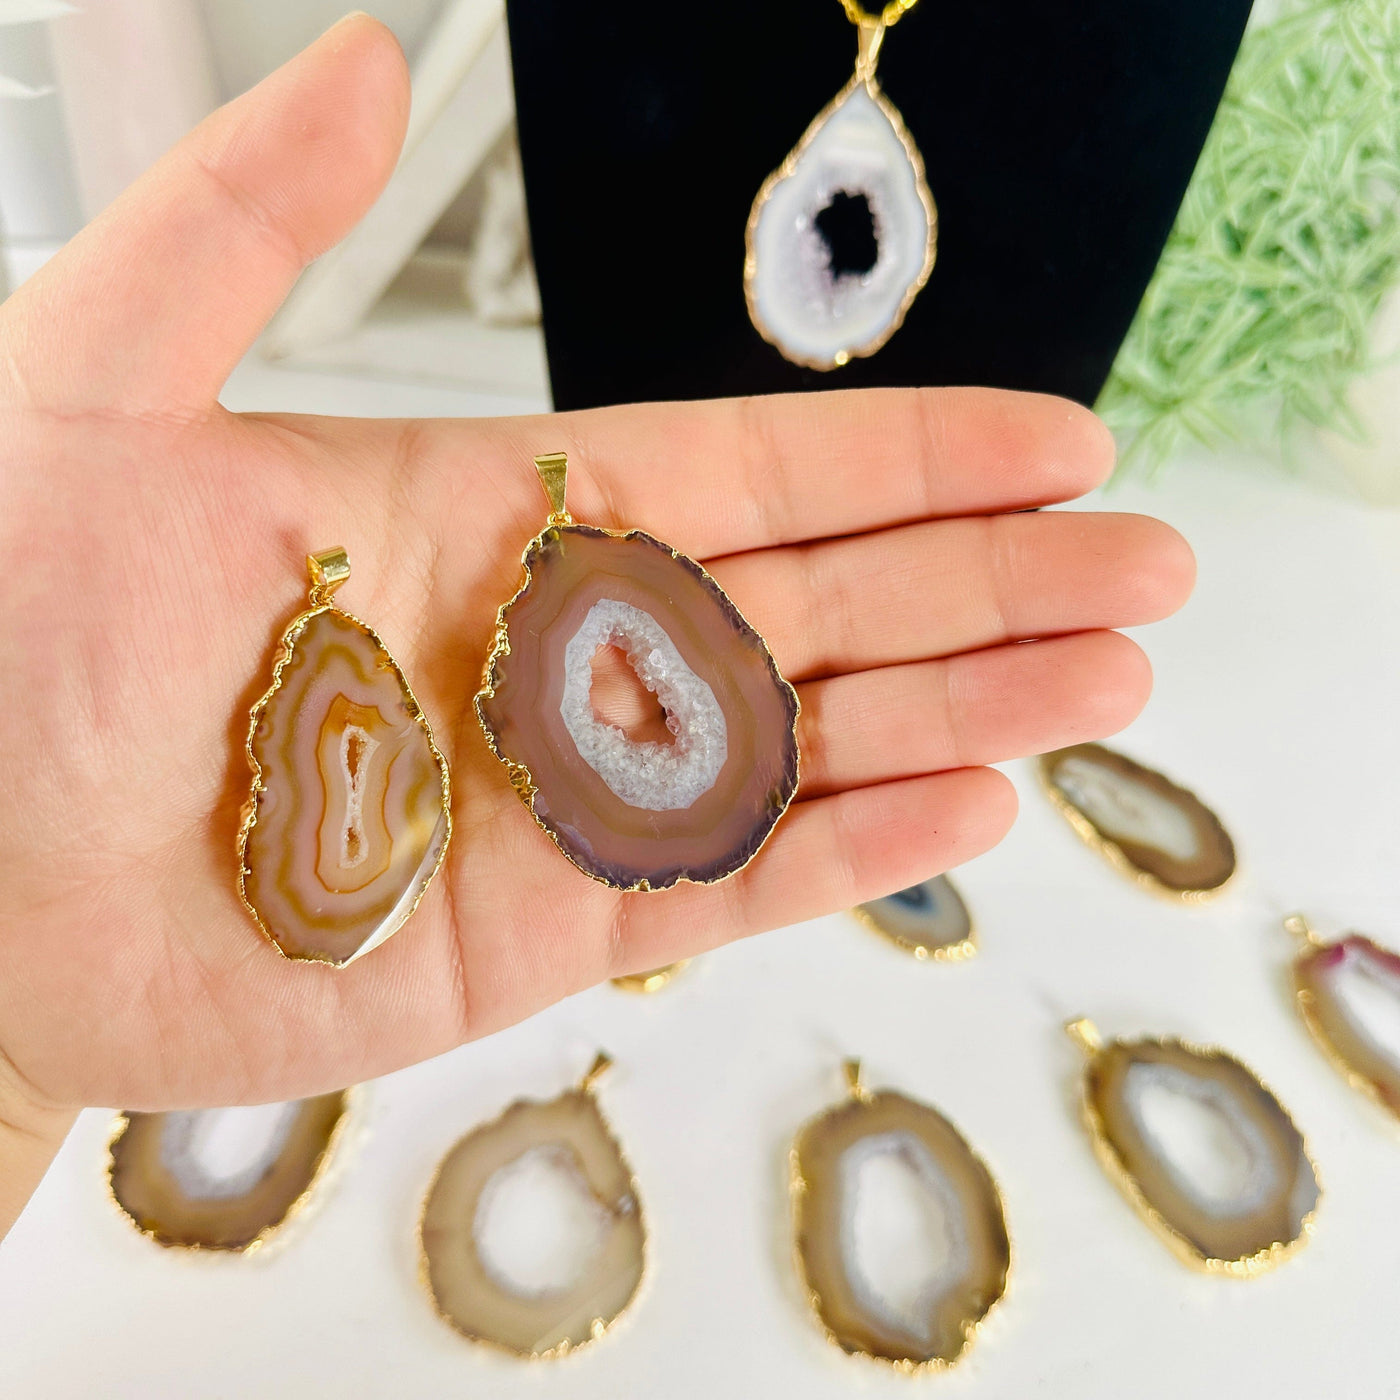 Agate Slice - Gold Electroplated Pendant with Gold Bail - You Choose agate pendant 3 and 9 in hand for size reference with other pendants in background